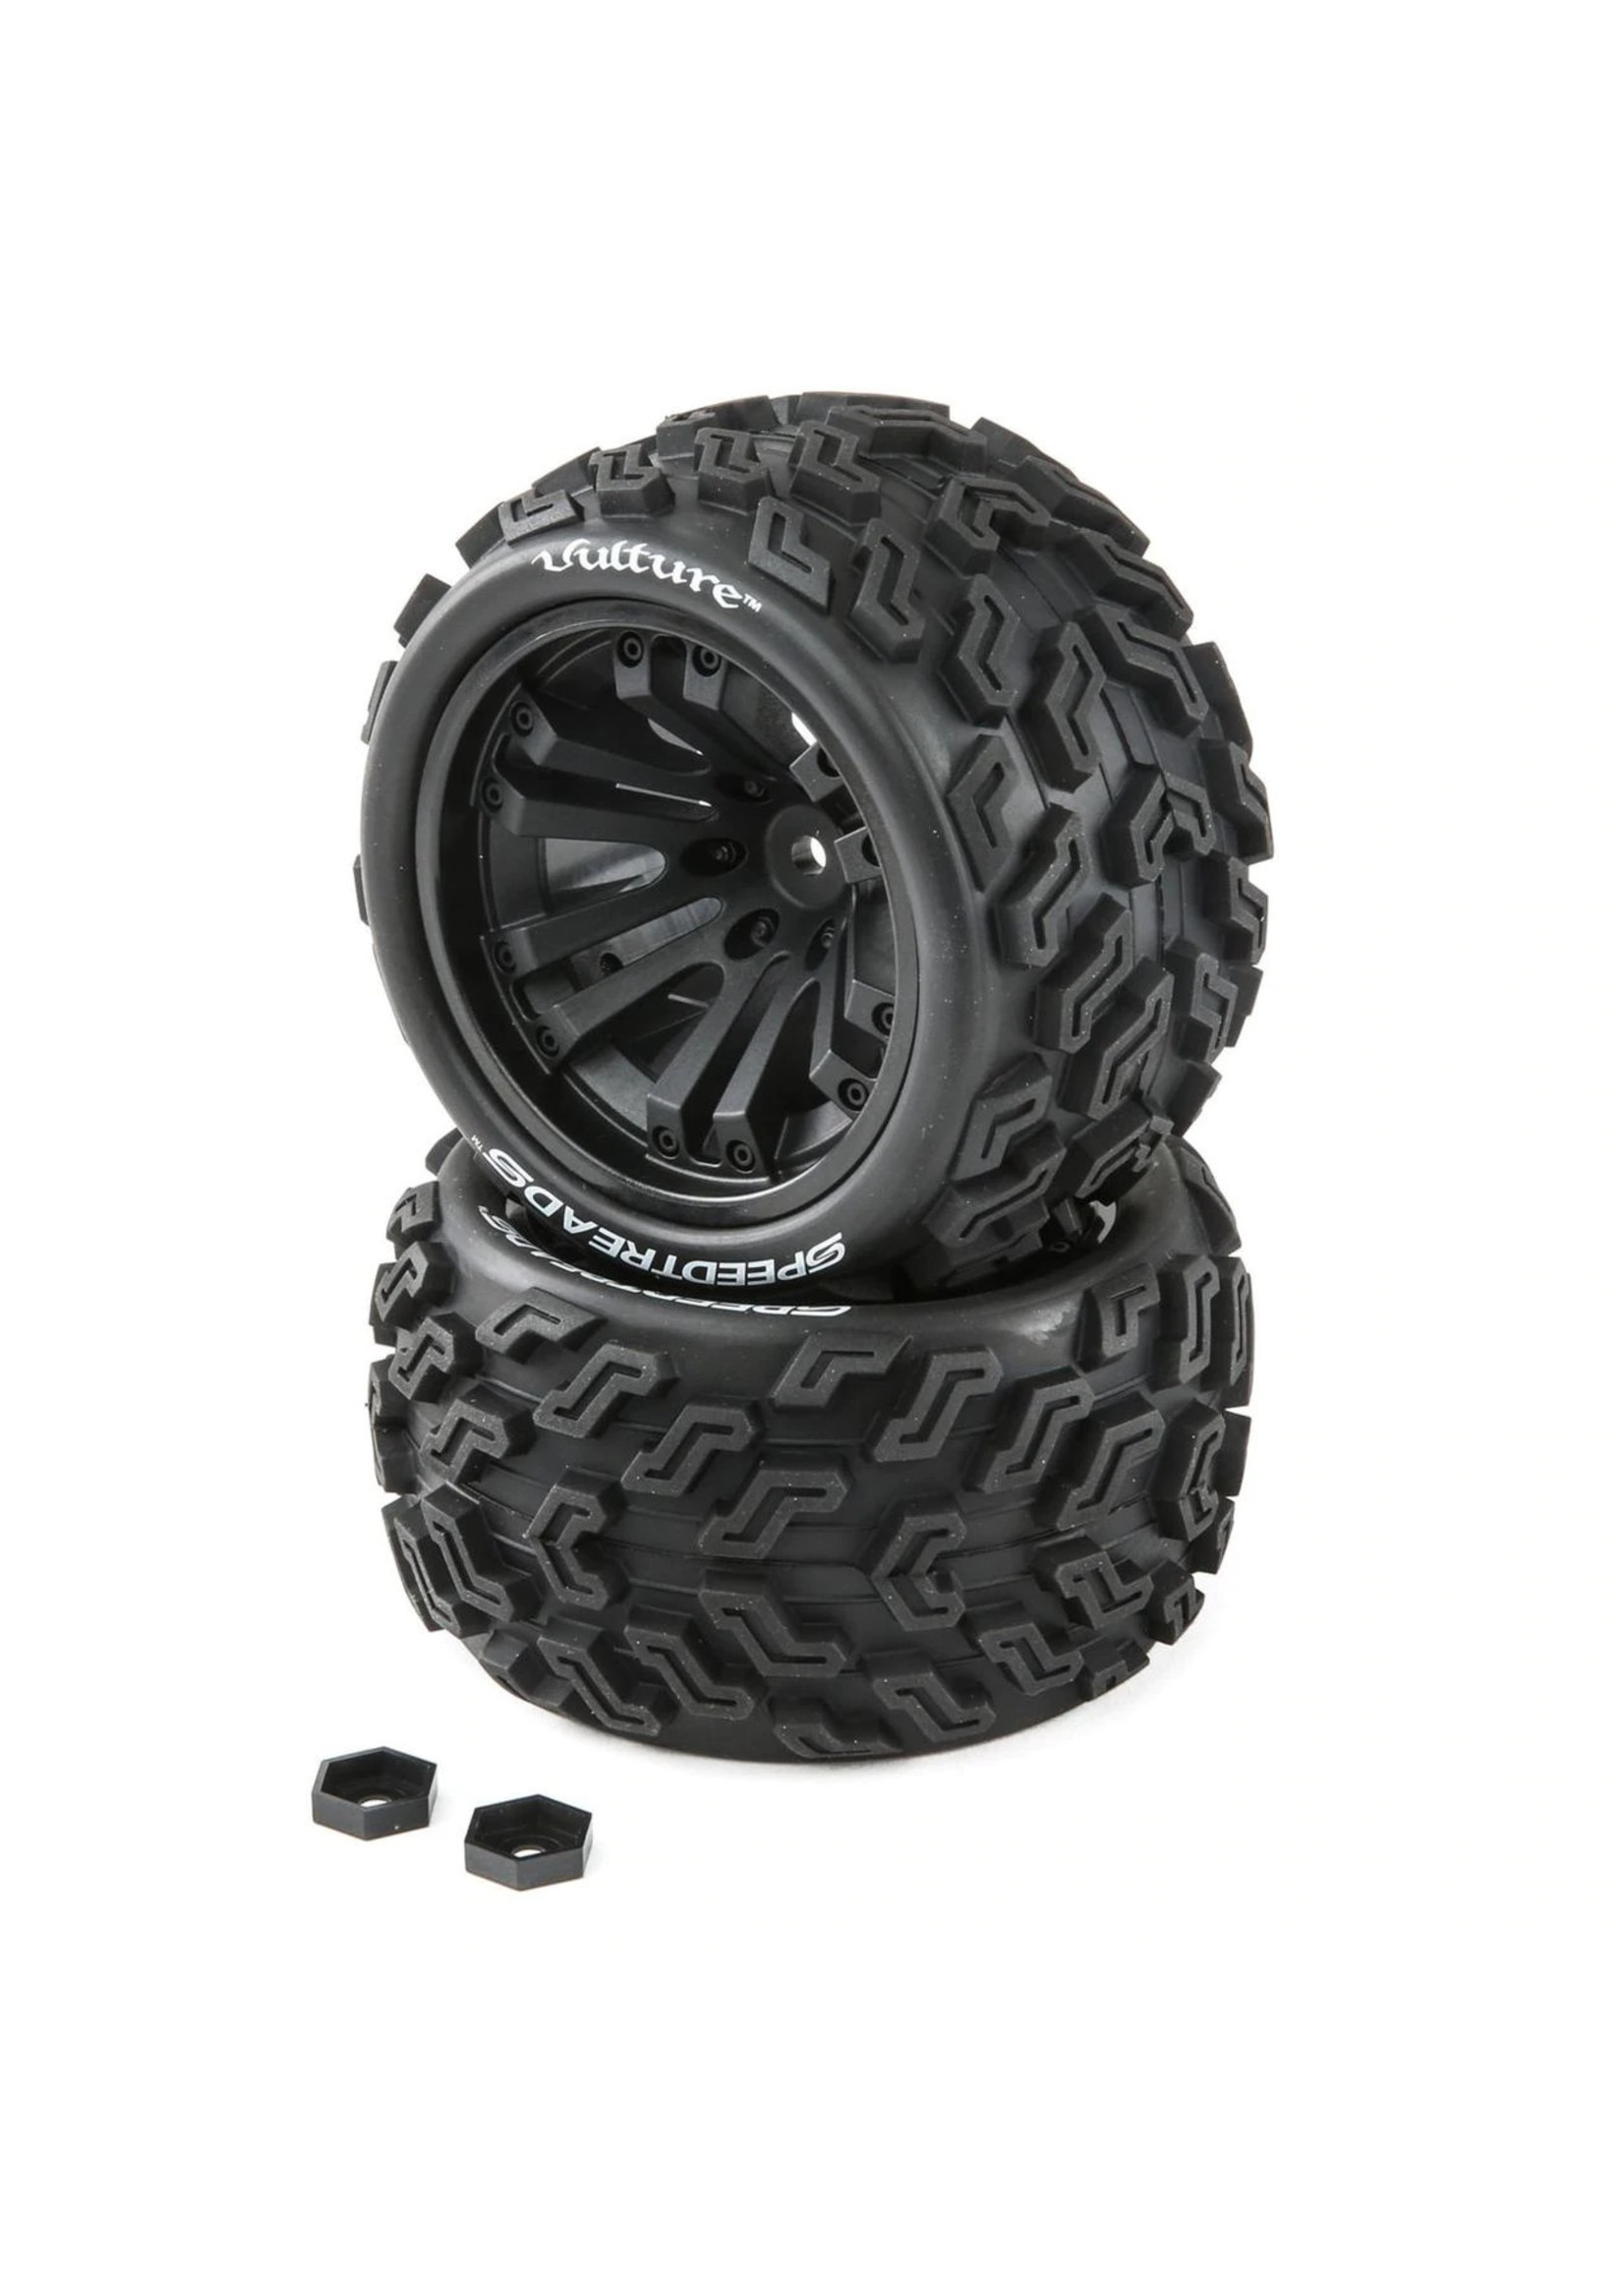 Duratrax DTXC2901 - SpeedTreads Vulture ST/MT Tires Mounted (2)